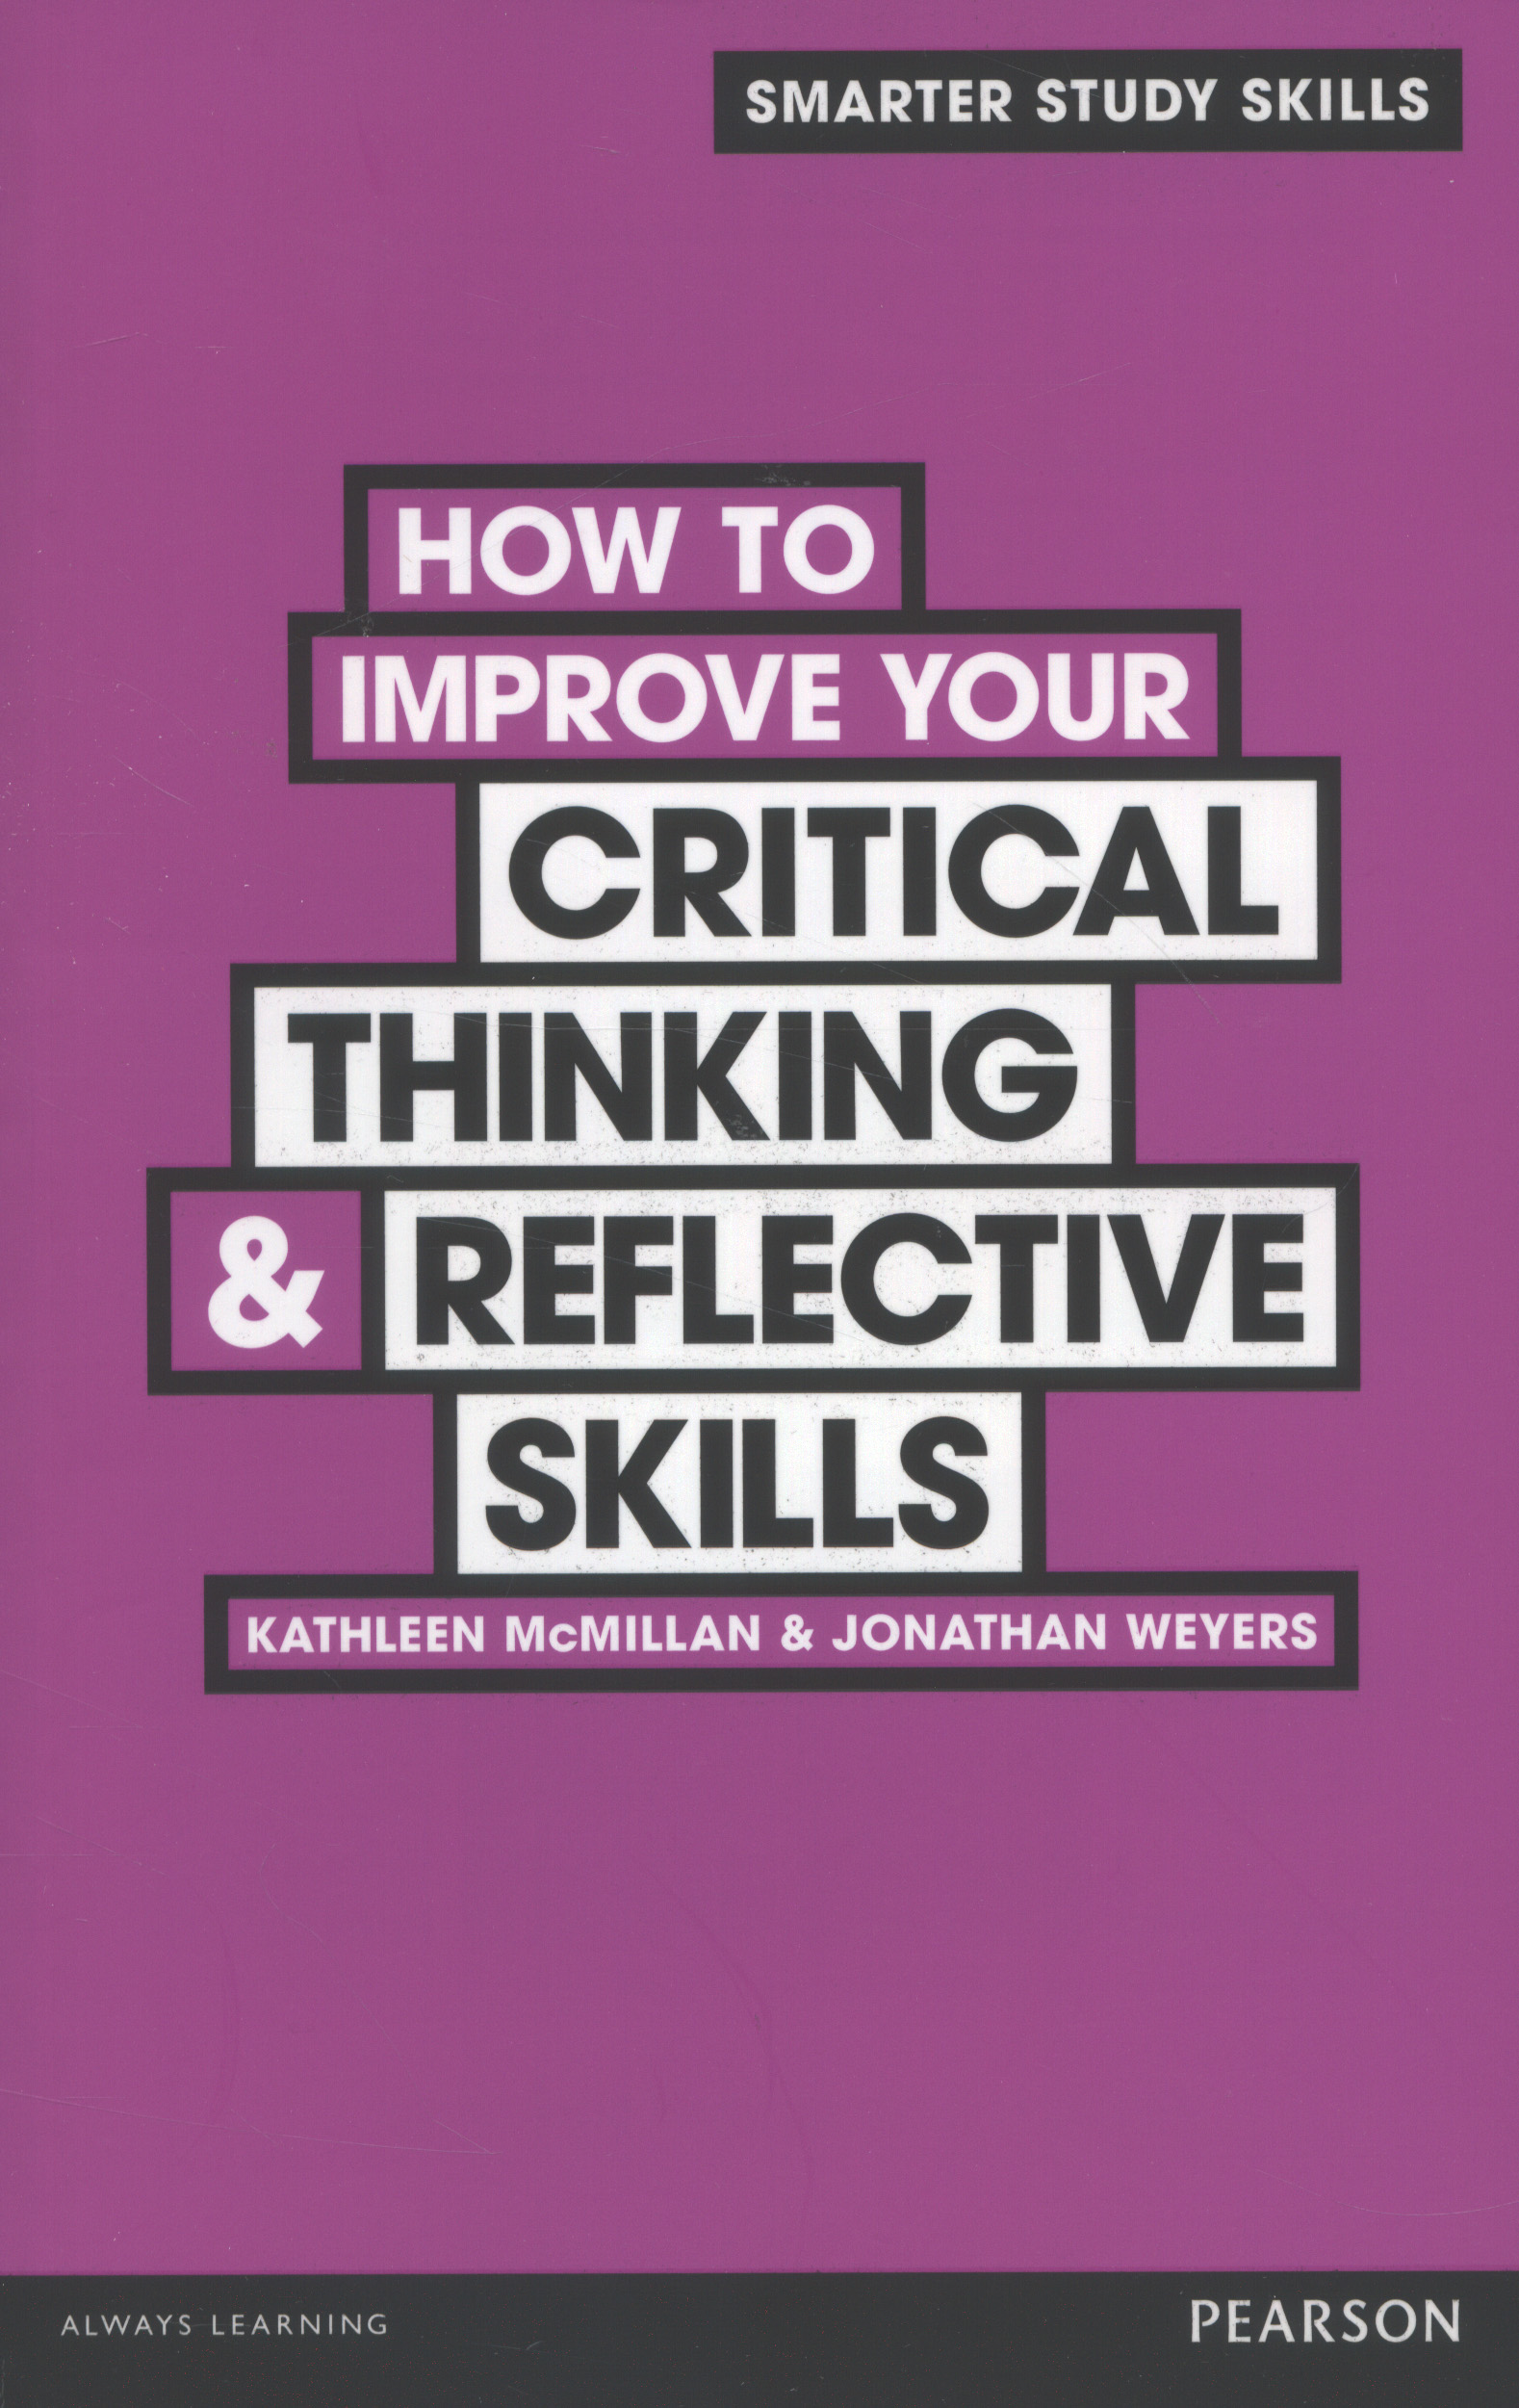 critical thinking and reflective practice book pdf aiou